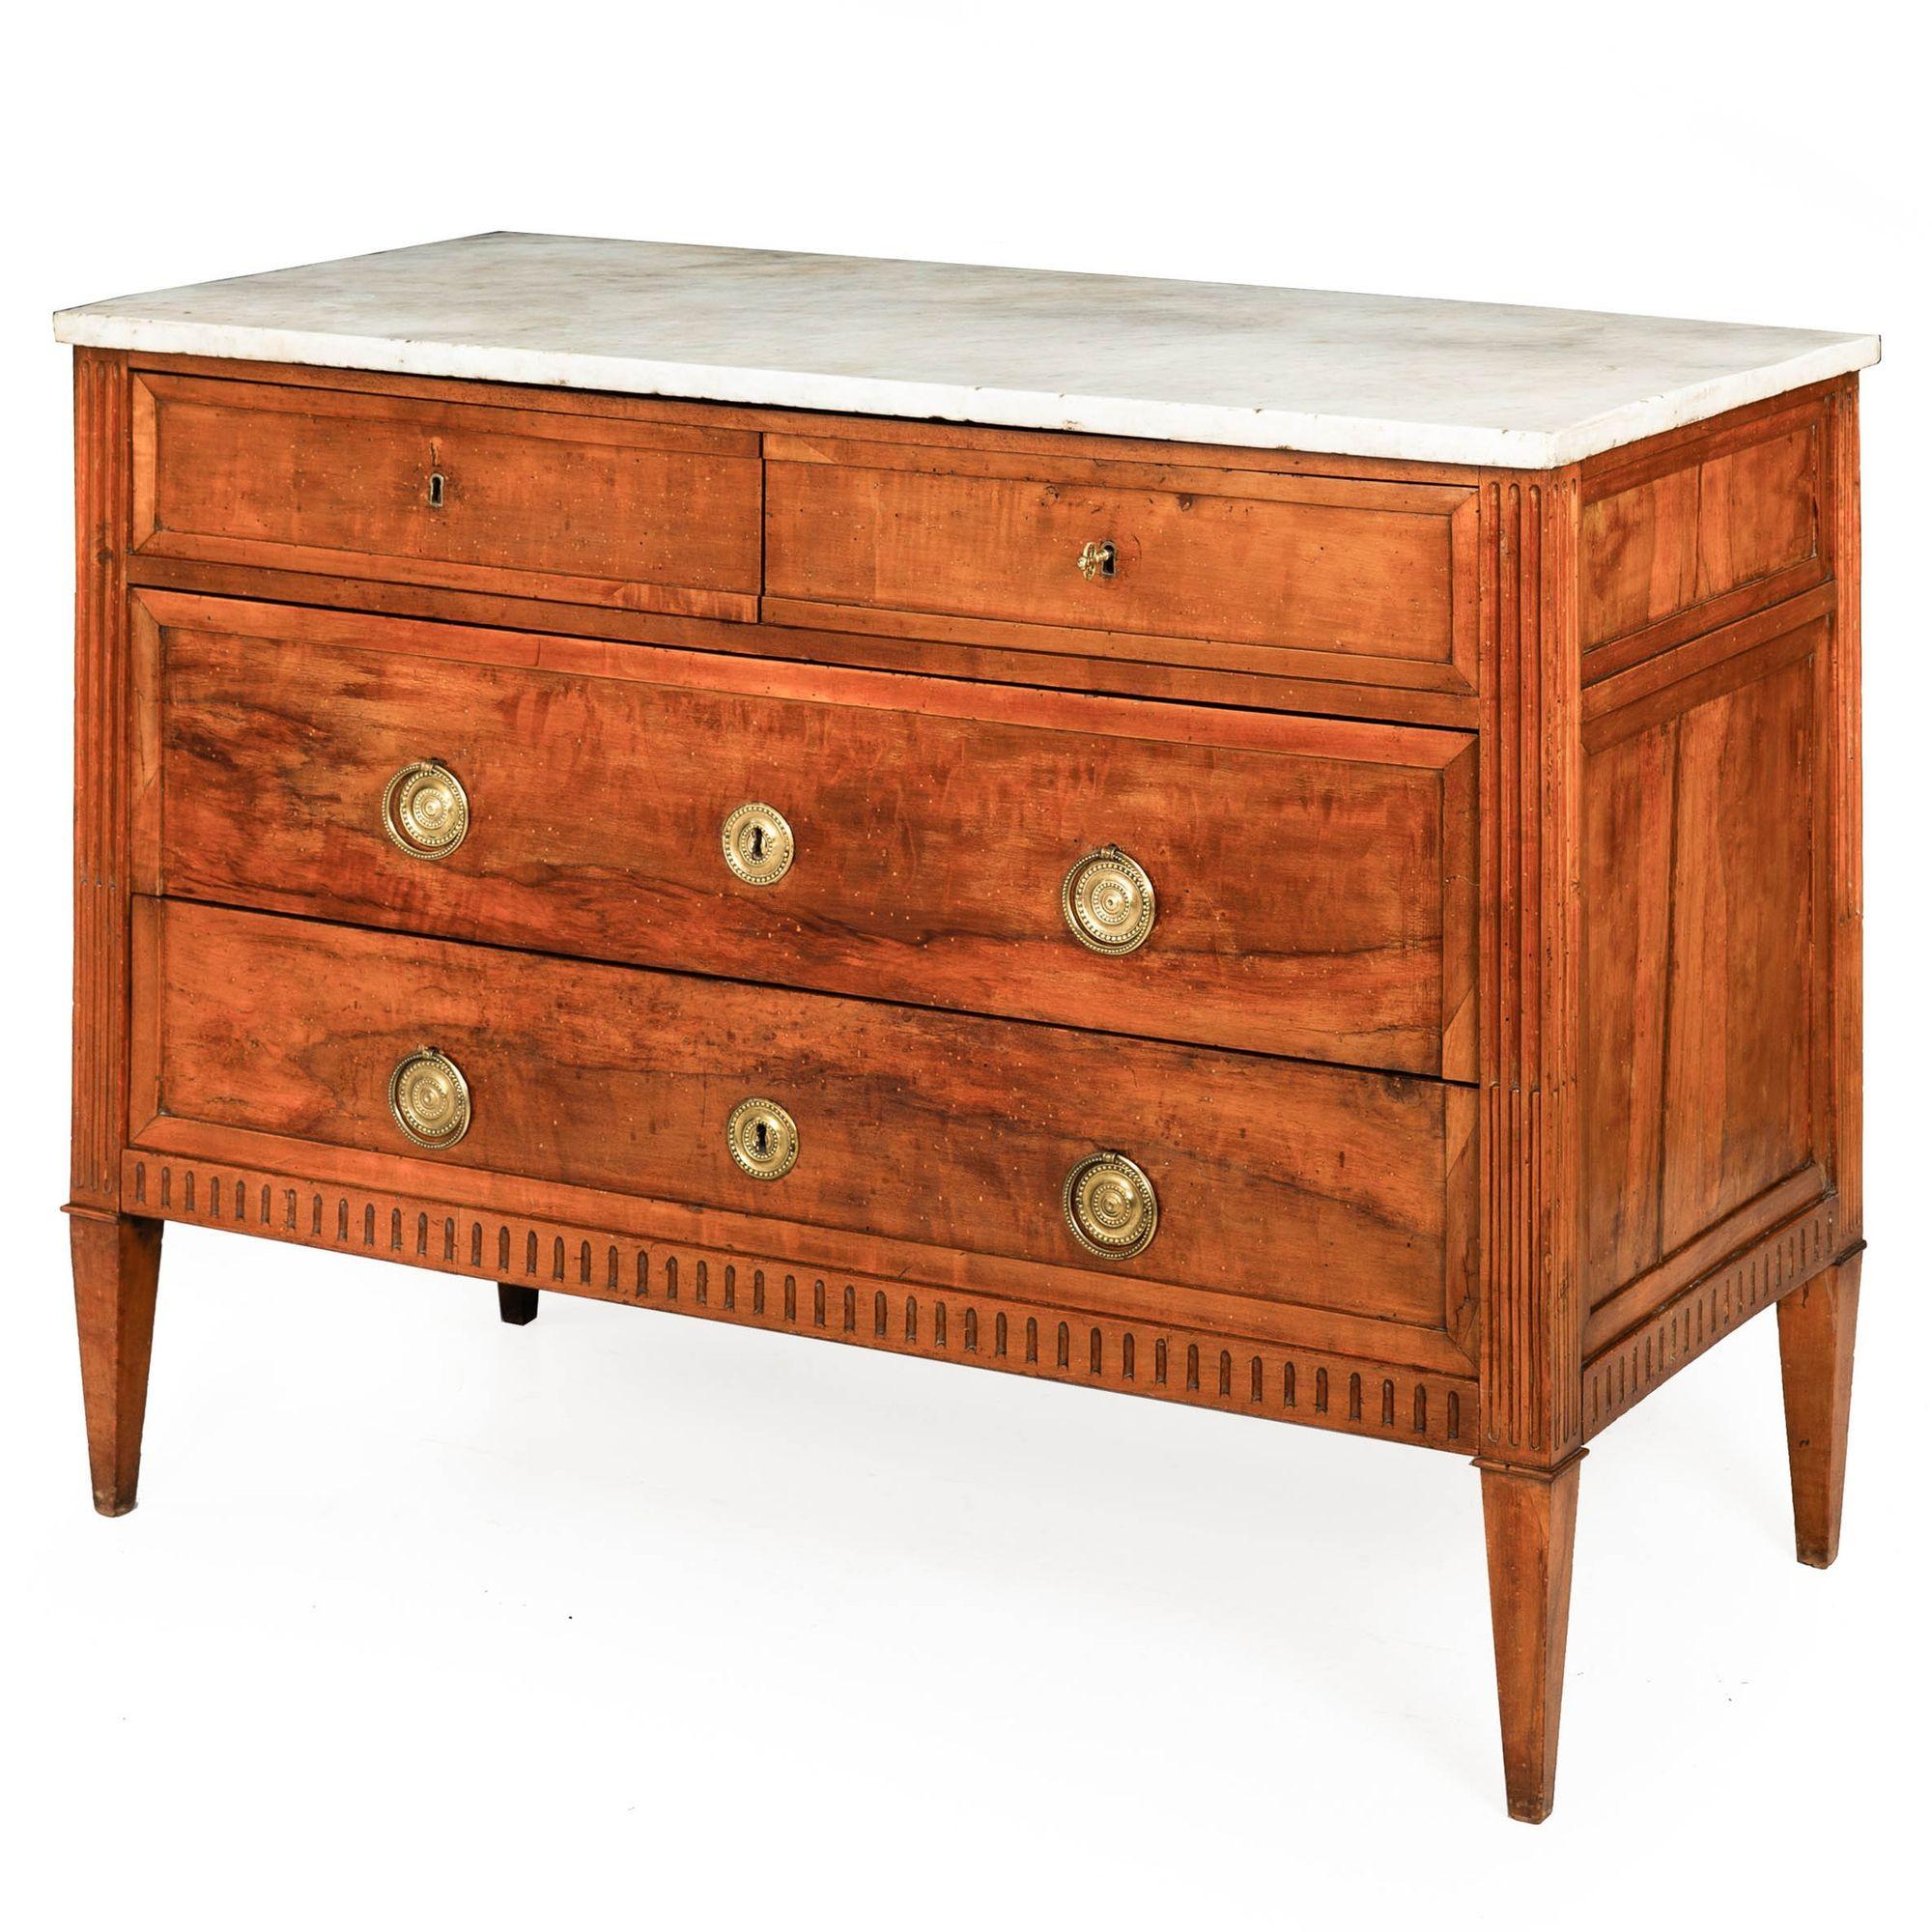 DIRECTOIRE PERIOD PROVINCIAL FRUITWOOD COMMODE
France, circa 1800  with Cararra marble top
Item # 307JYR13Q 

A beautifully worn and patinated commode from the first years of the 19th century, this Directoire chest of drawers features a fantastic